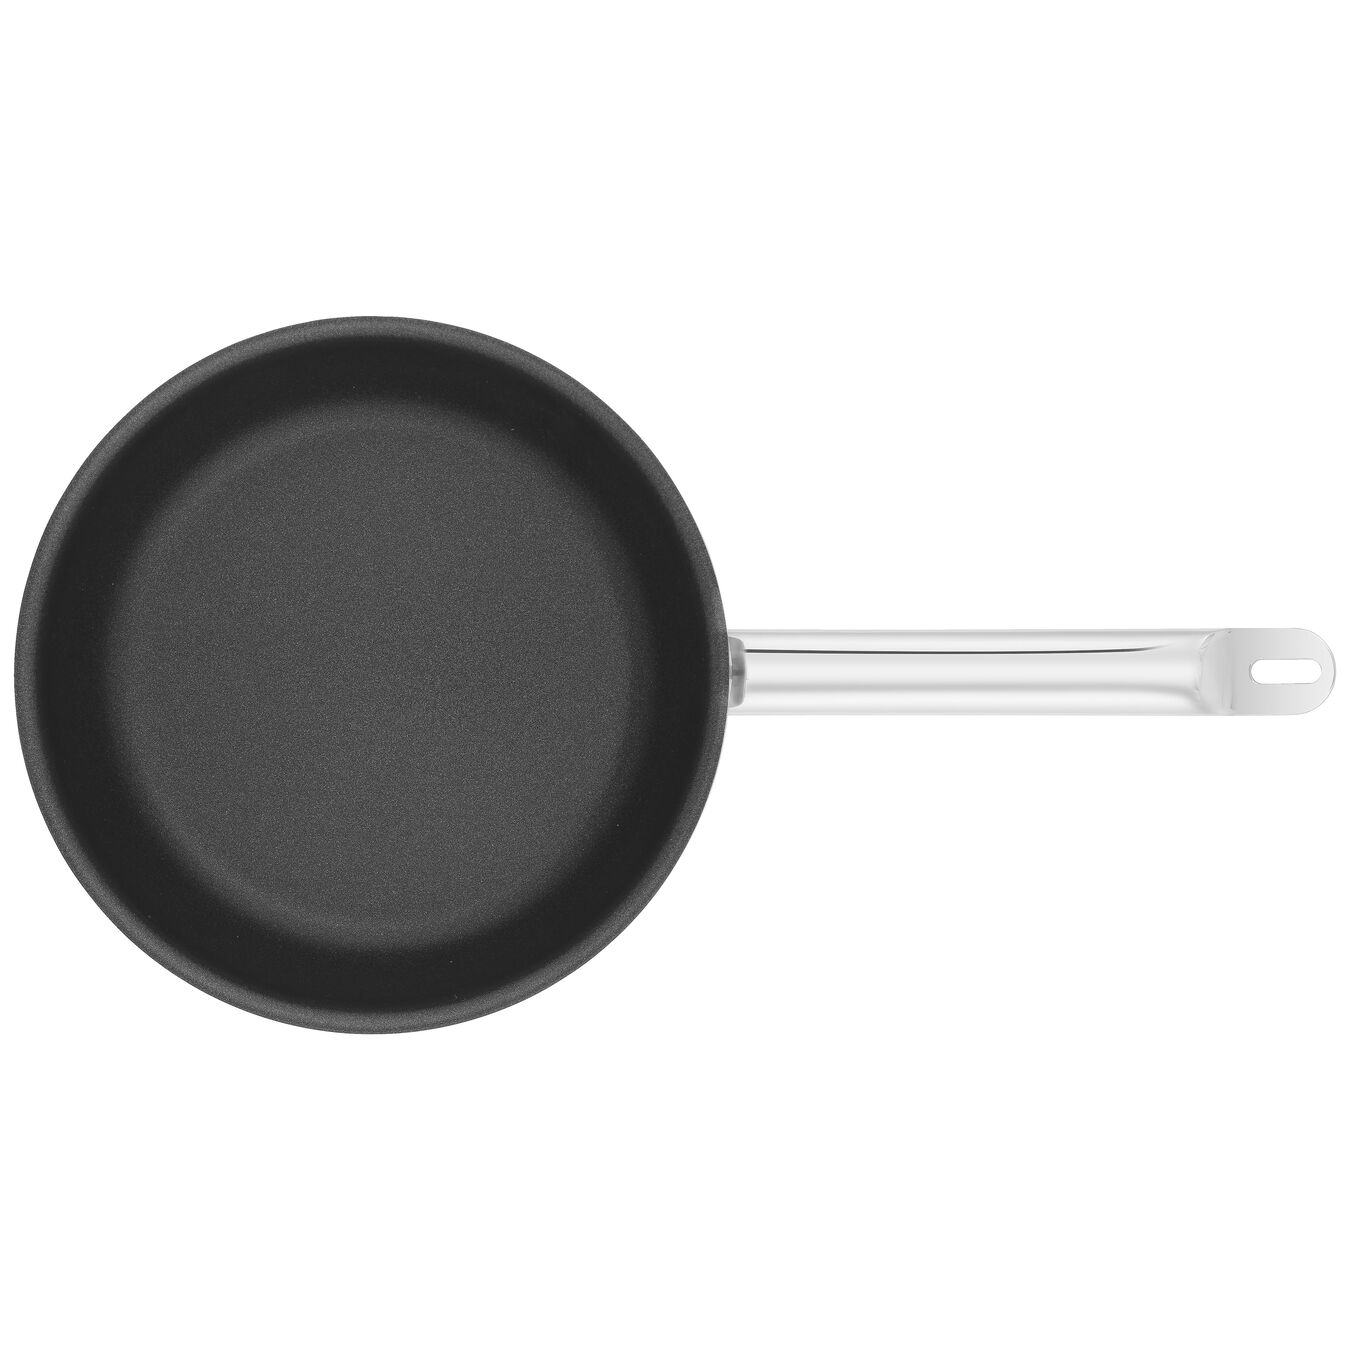 26 cm 18/10 Stainless Steel Frying pan,,large 4